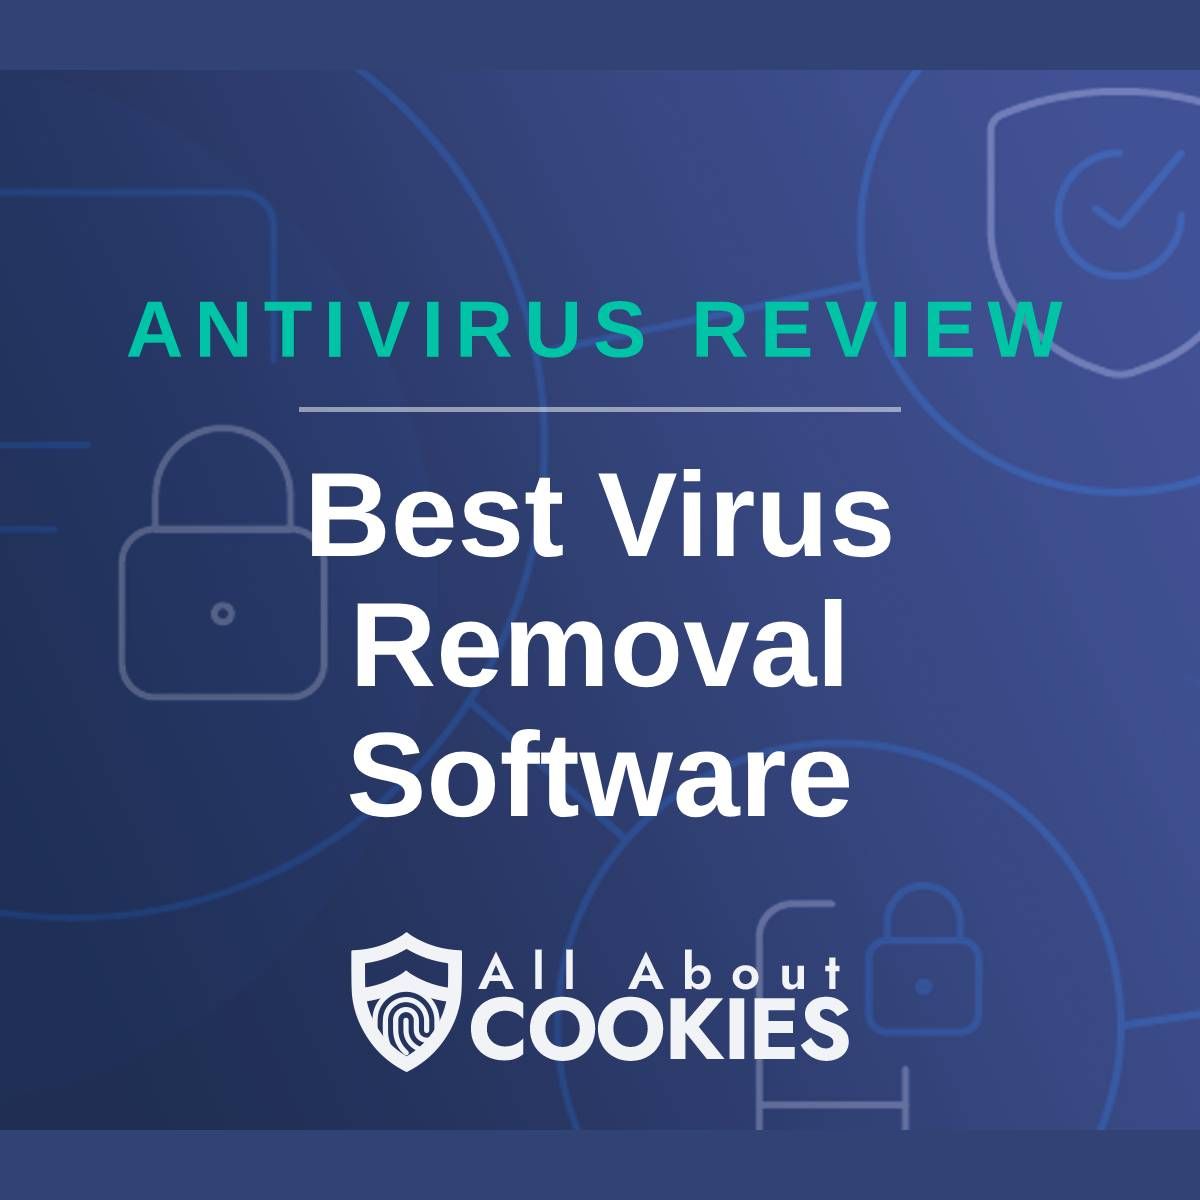 A blue background with images of locks and shields with the text &quot;Antivirus Review Best Virus Removal Software&quot; and the All About Cookies logo. 